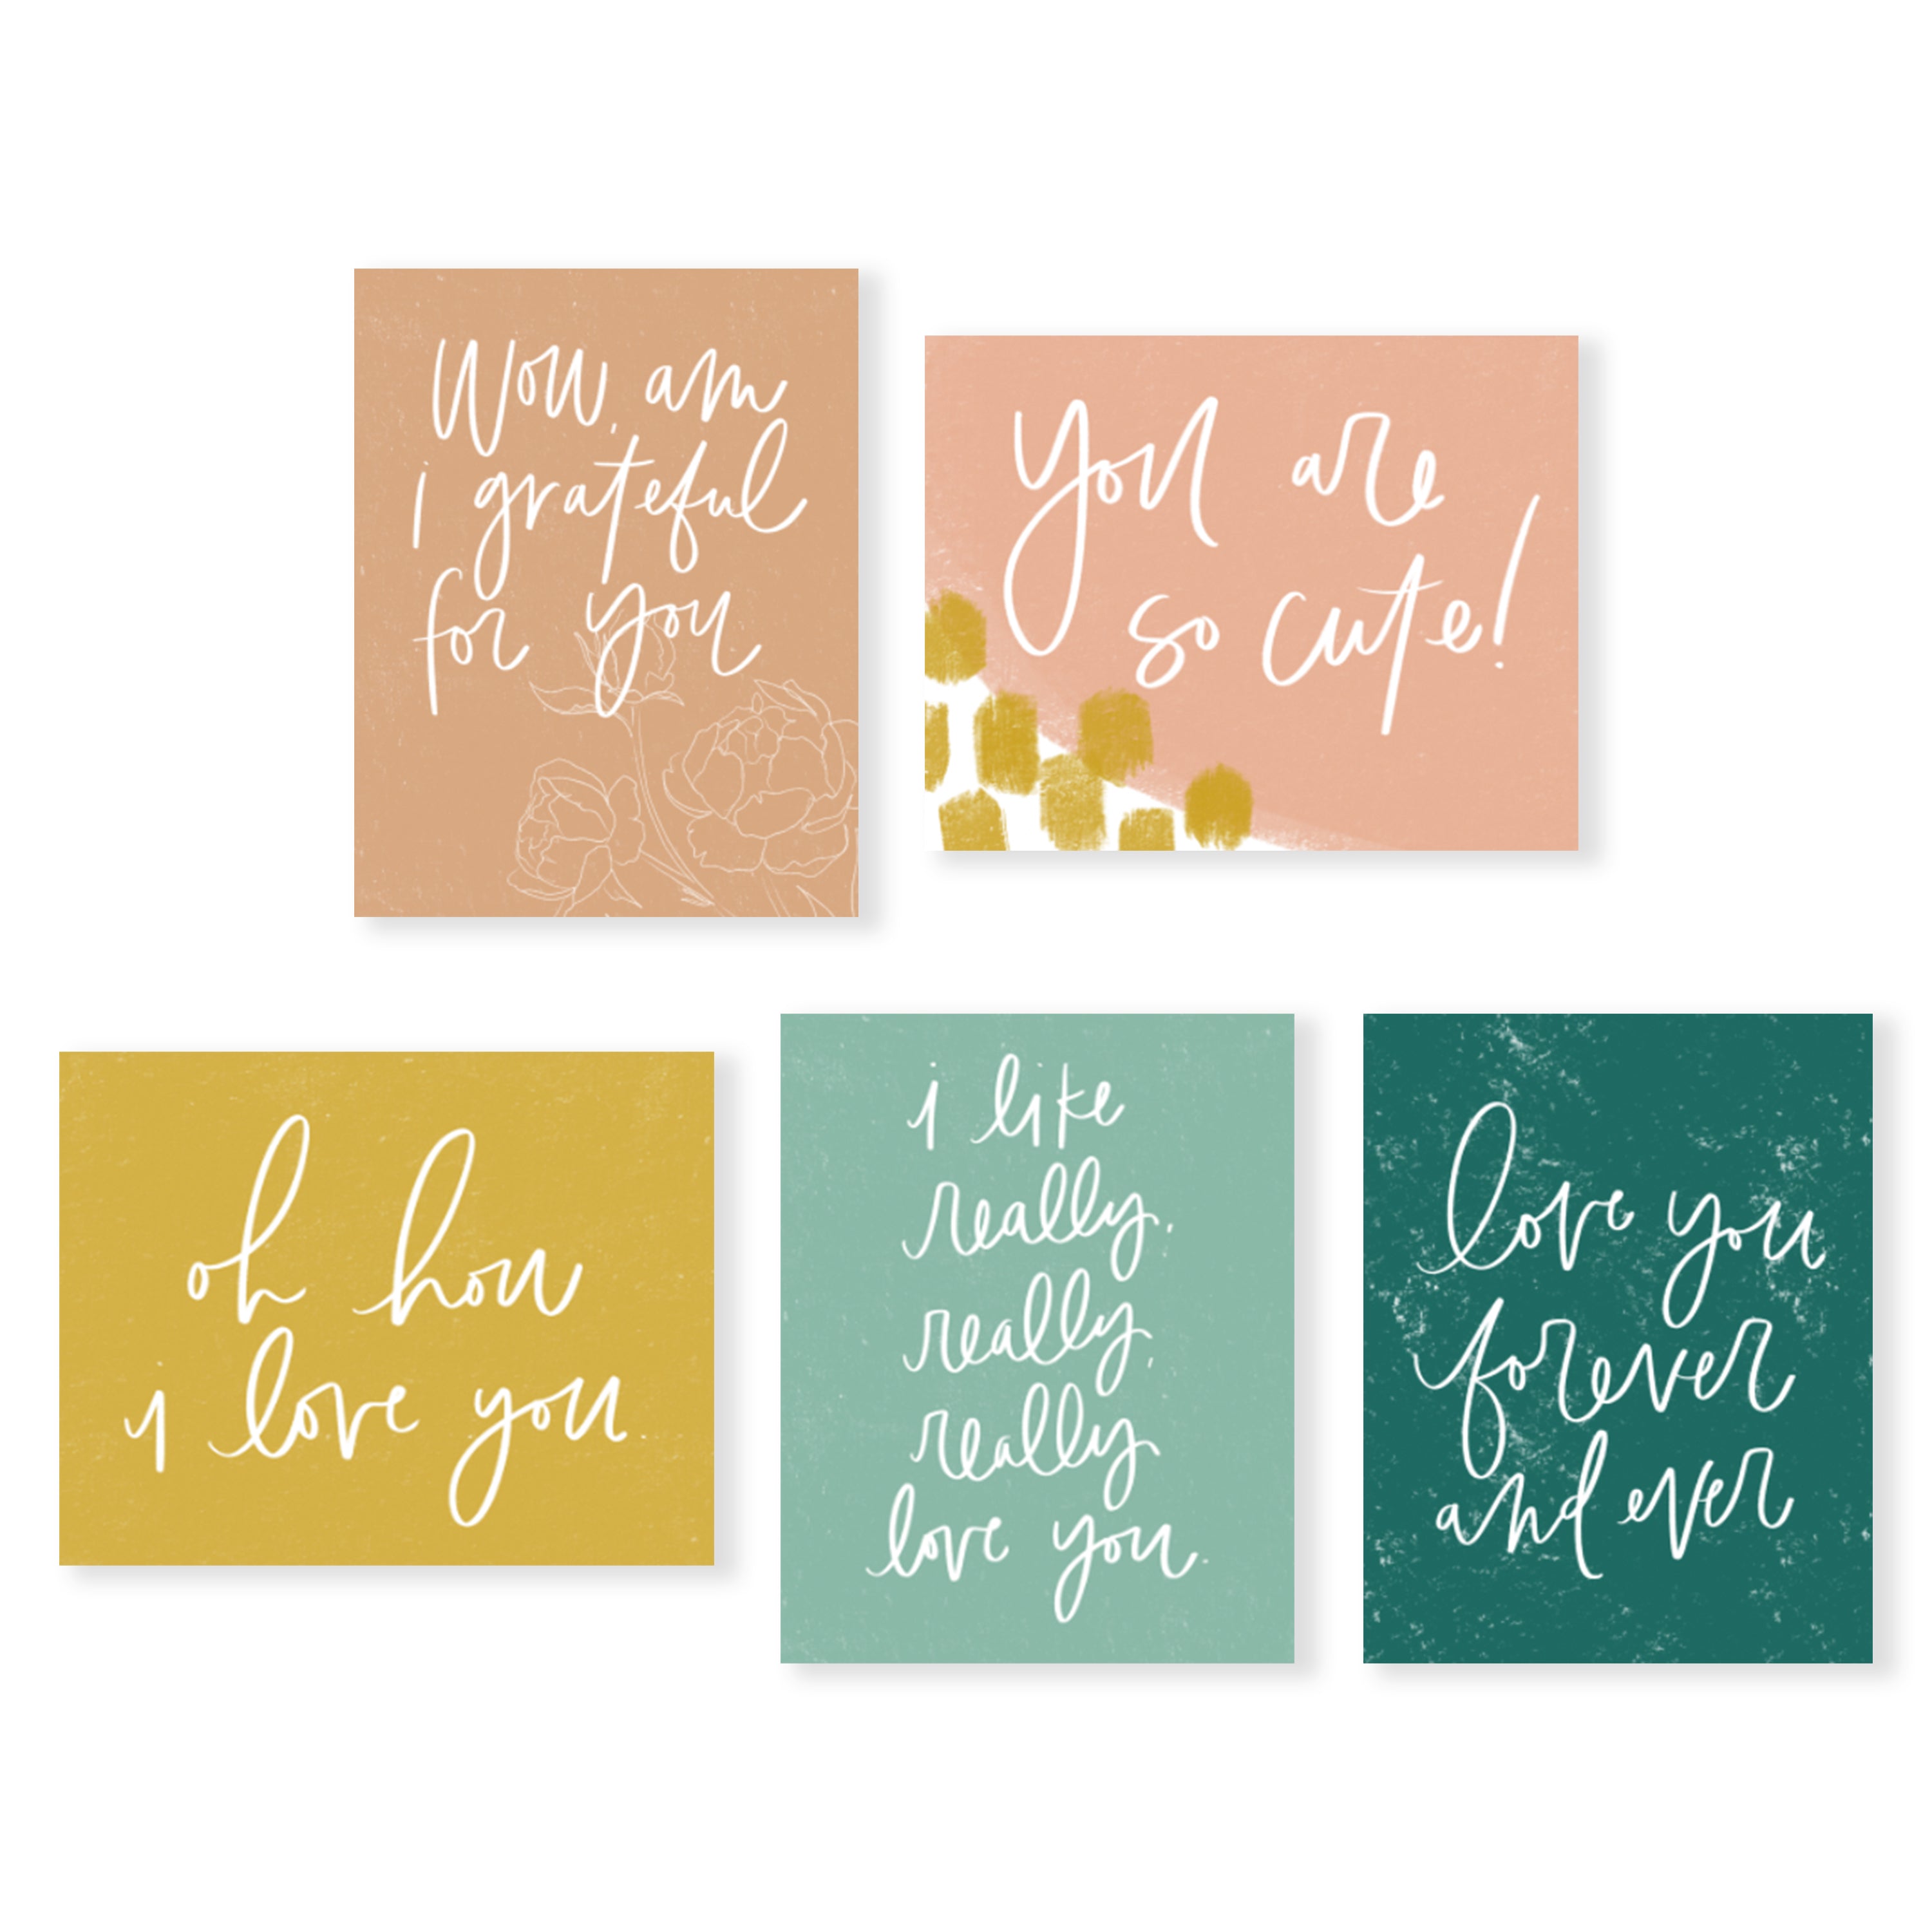 oh joyful day greeting card greeting cards set colorful stationery cheerful stationery heartfelt stationery heartfelt cards snail mail love letters illustration illustrator pittsburgh art pittsburgh artist calligraphy pittsburgh calligrapher handlettering handletterer abstract art abstract artist